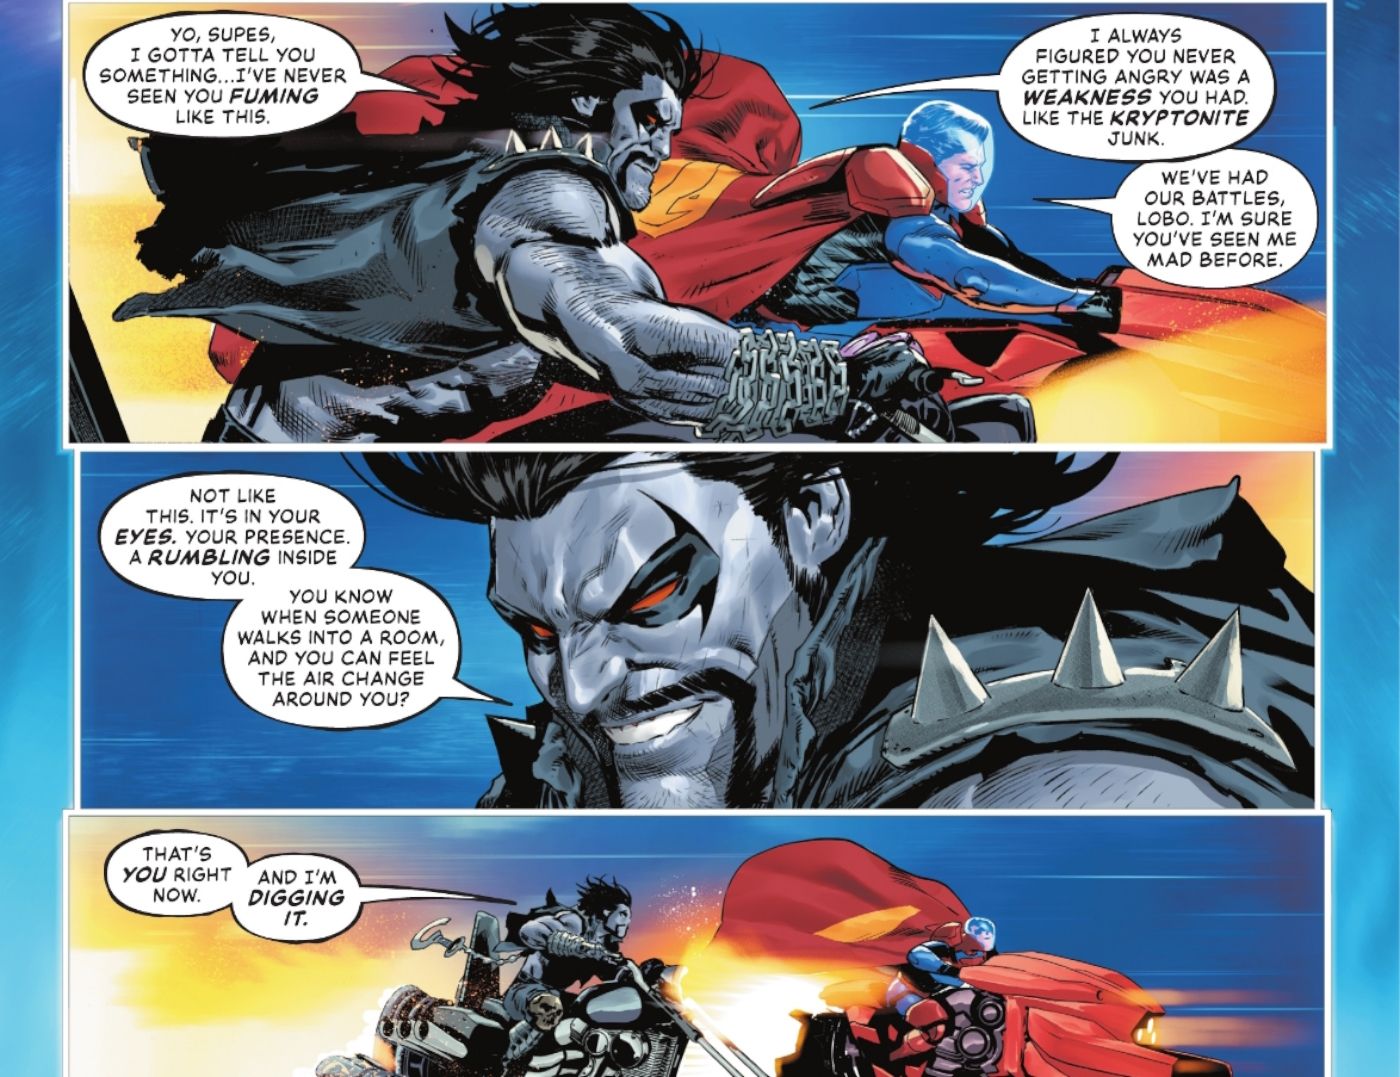 Superman Finally Learns the Perfect Lesson about Anger (From DC’s Wolverine)